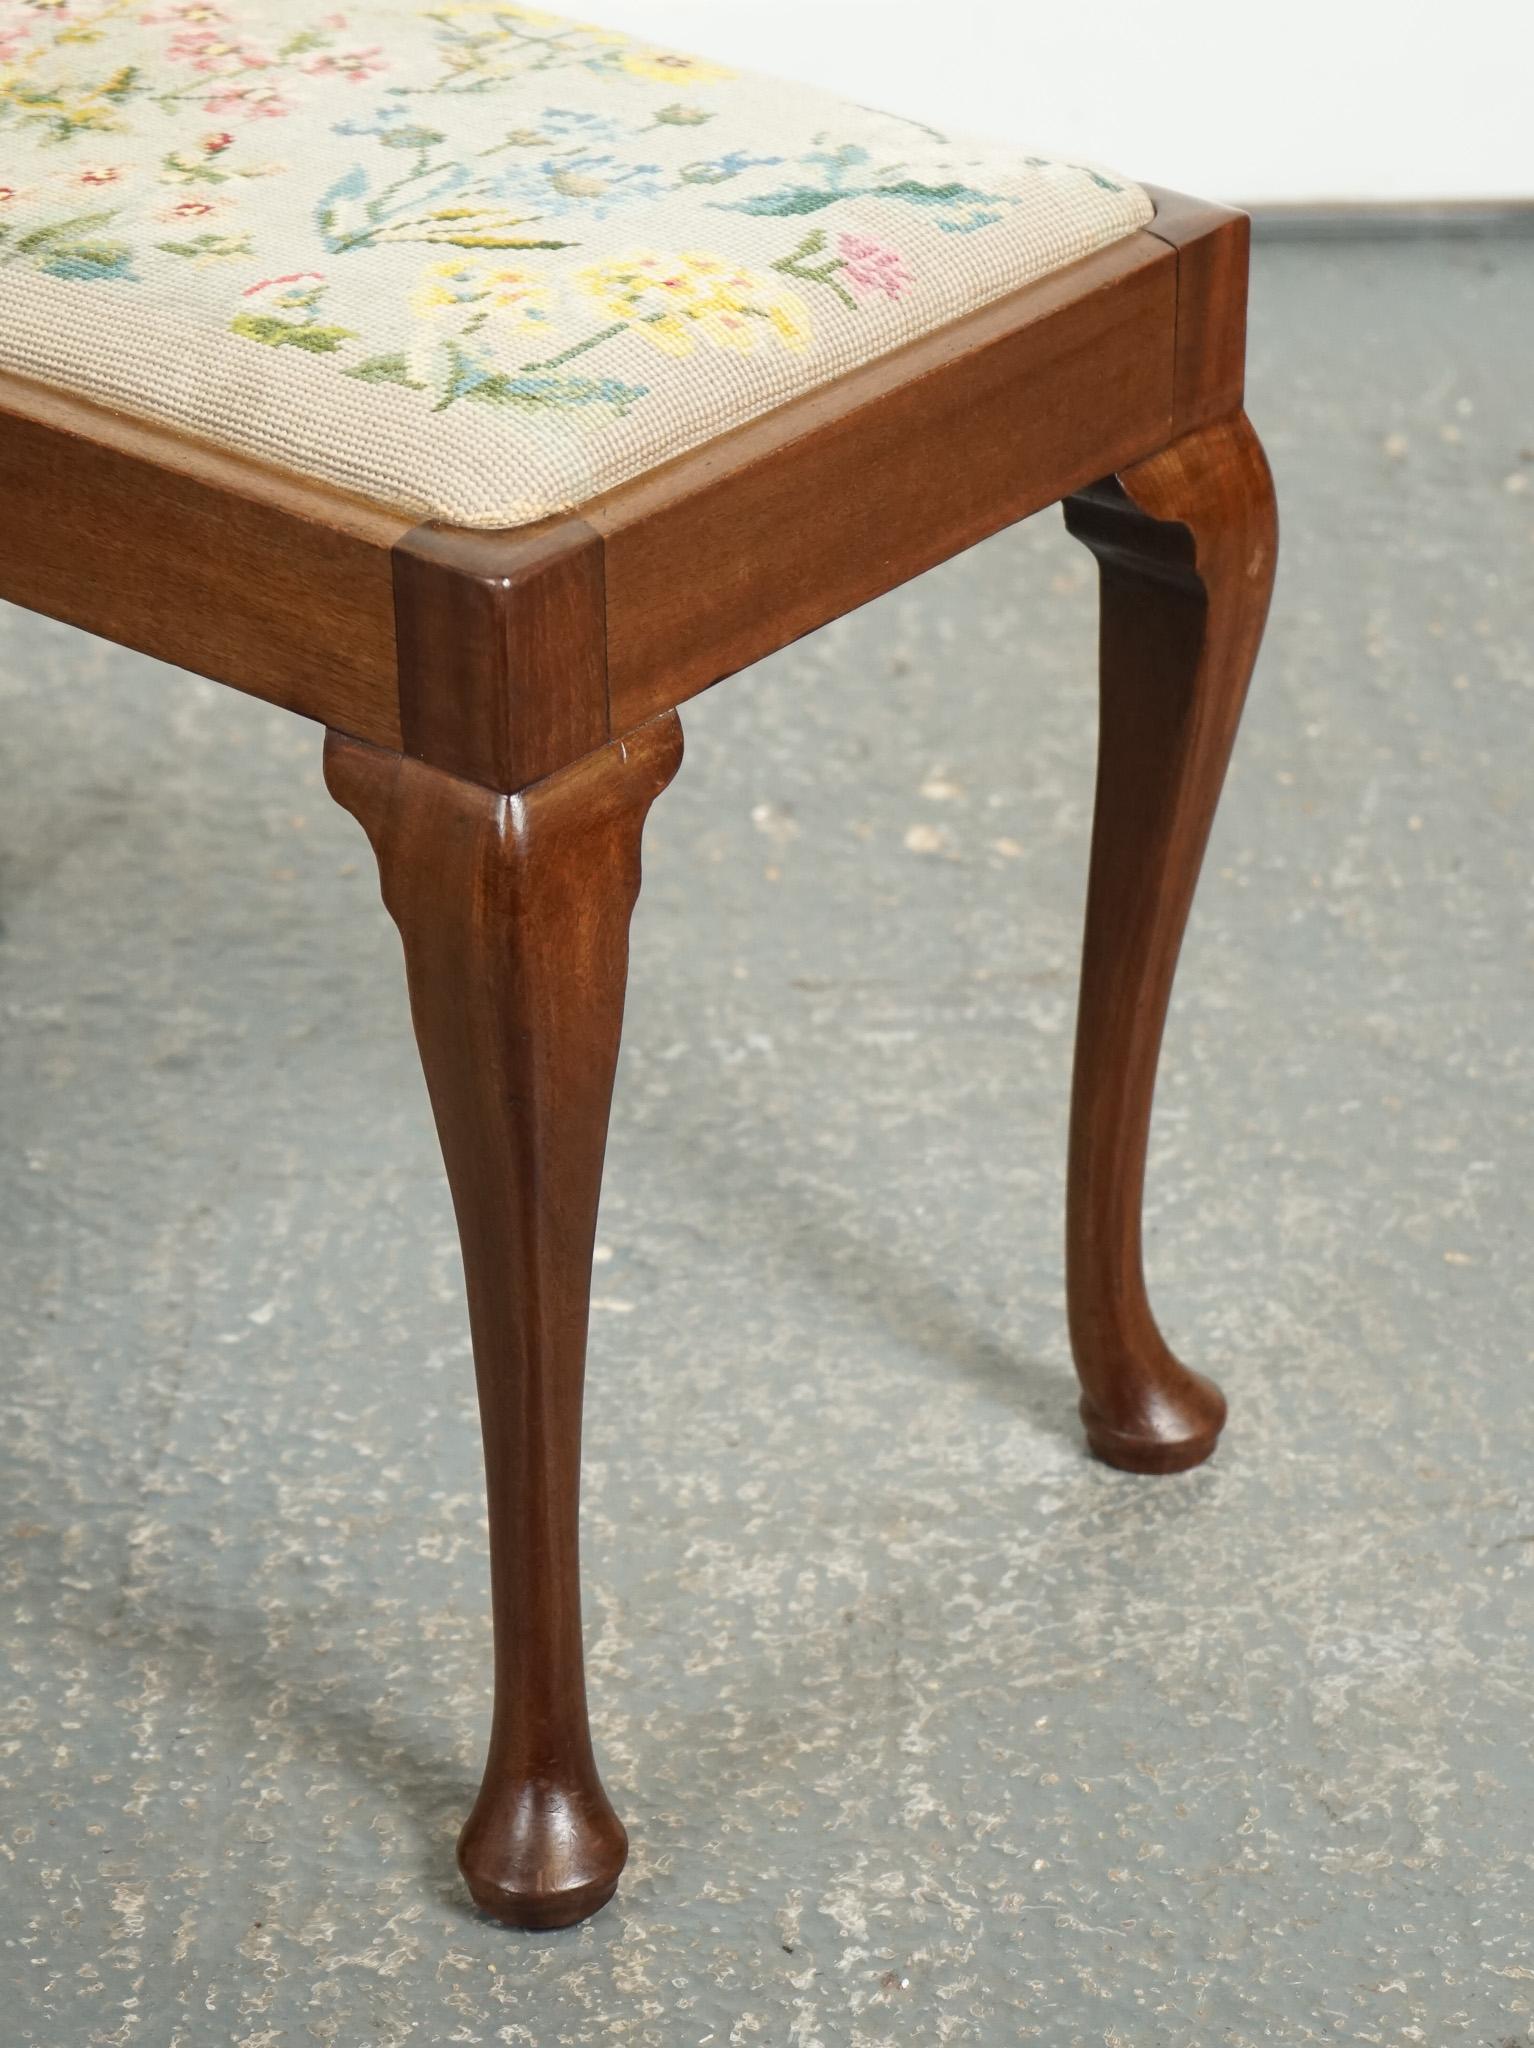 20th Century LARGE PIANO DRESSING TABLE STOOL WITH FLOWER STITCHWORK WITH QUEEN ANNE LEGS j1 For Sale